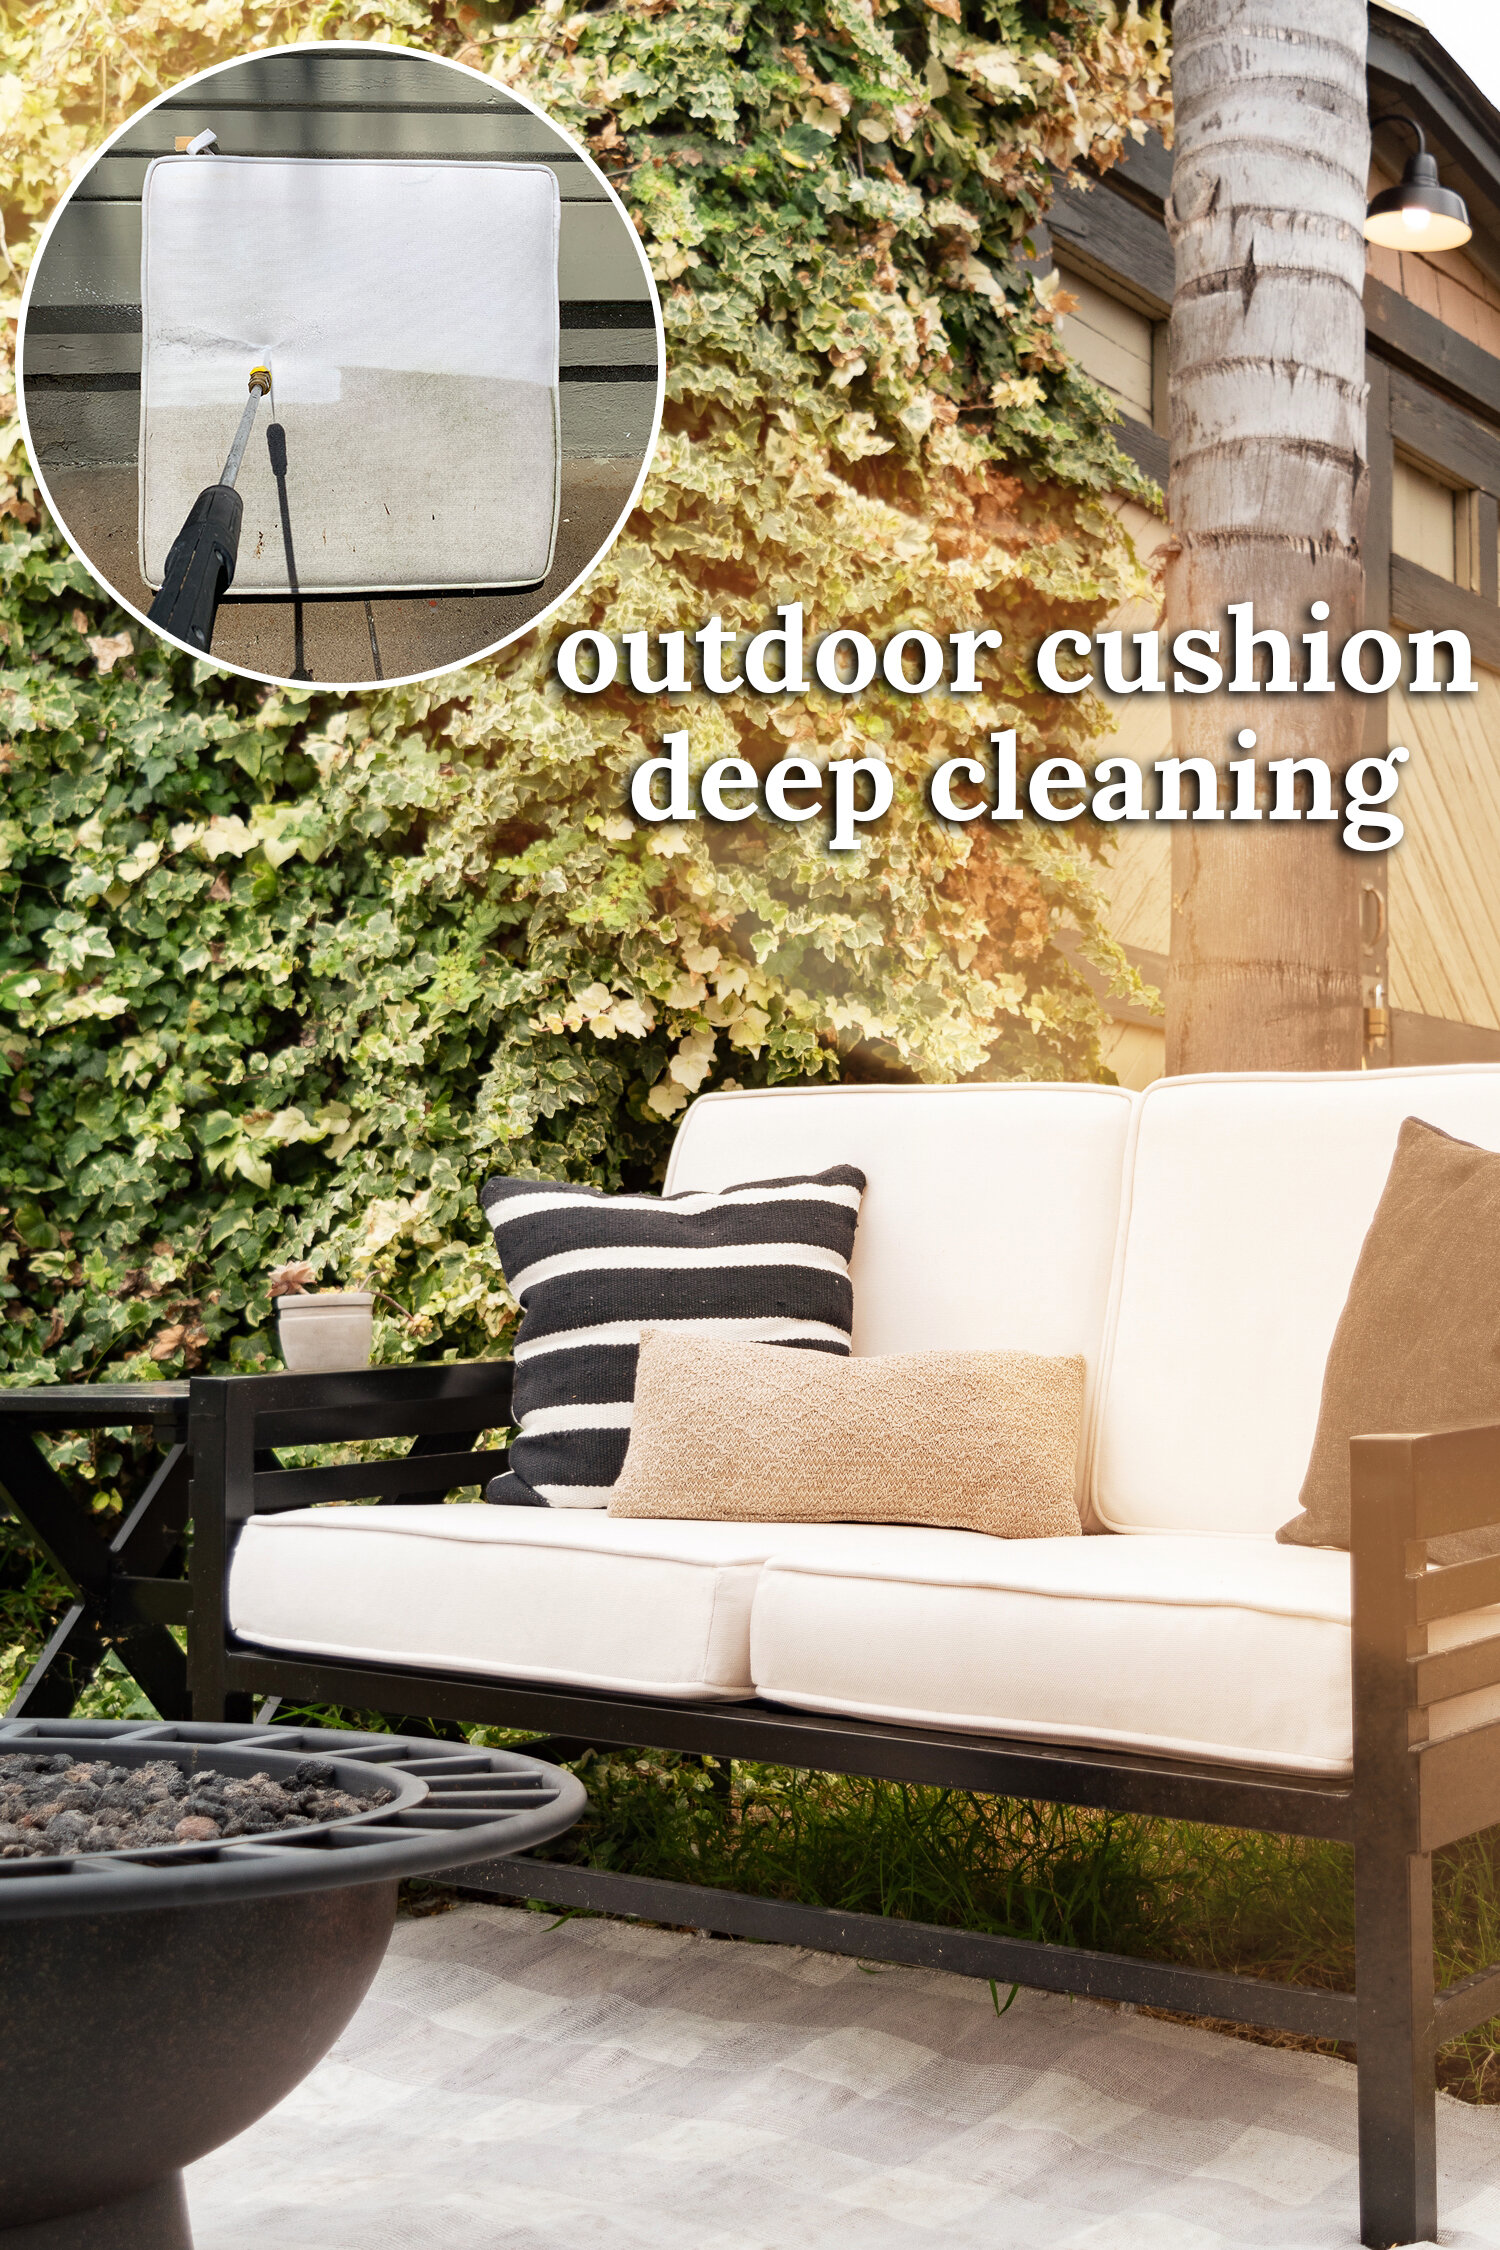 Pressure Washing My Outdoor Cushions, How To Machine Wash Outdoor Cushion Covers